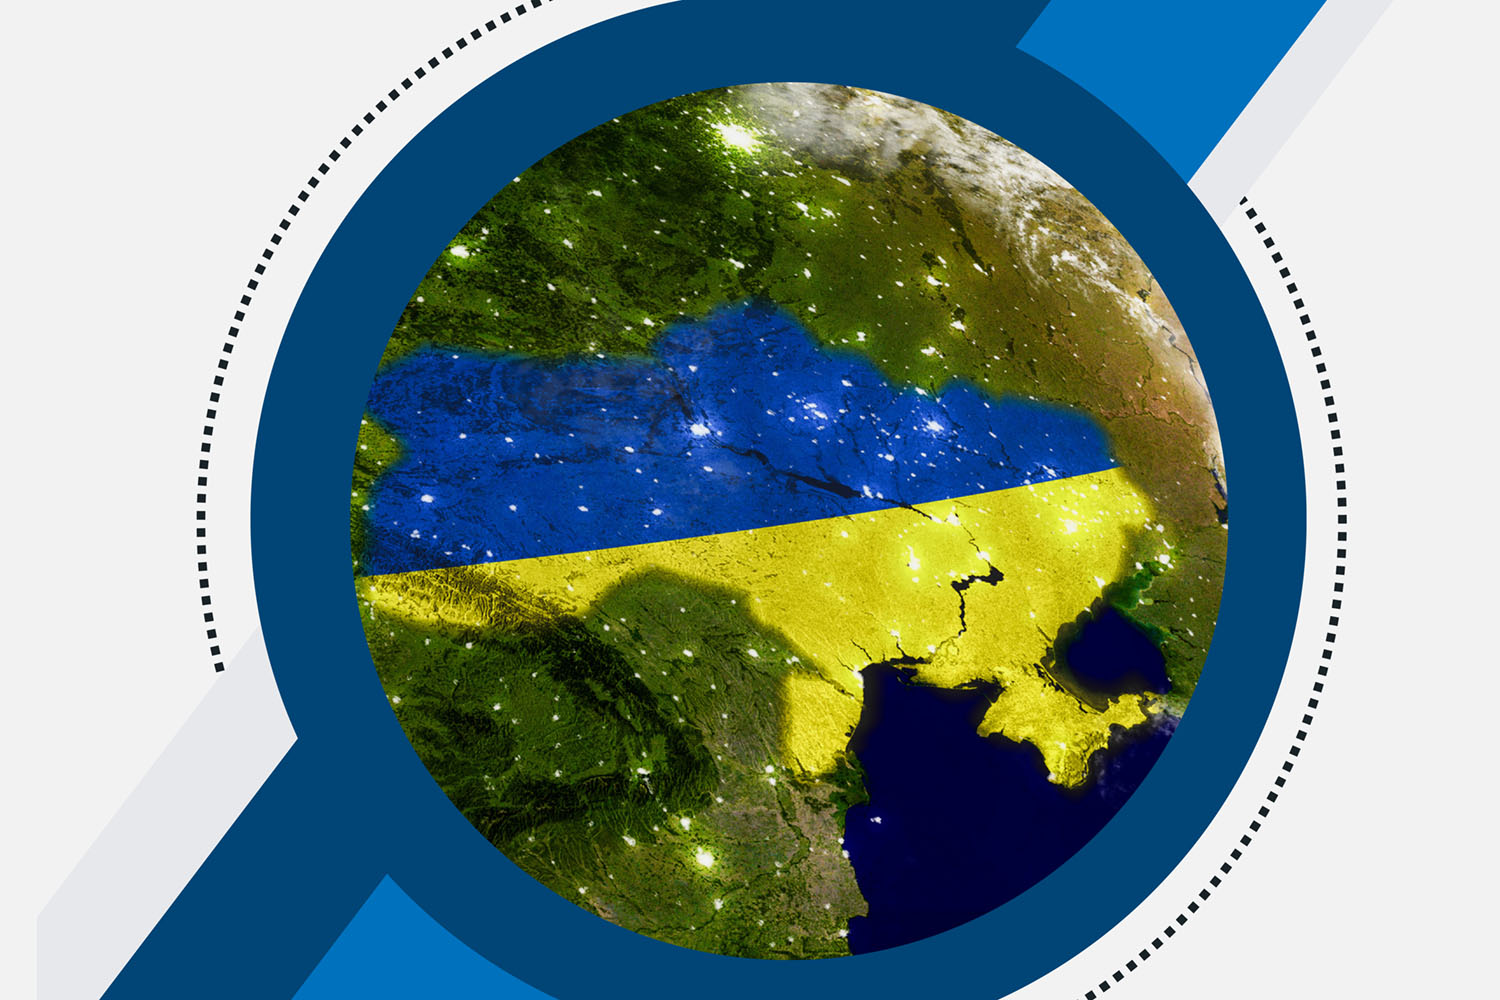 An illustration of a magnifying glass with a view of Ukraine from space. The country is colored in blue and yellow to resemble its flag.